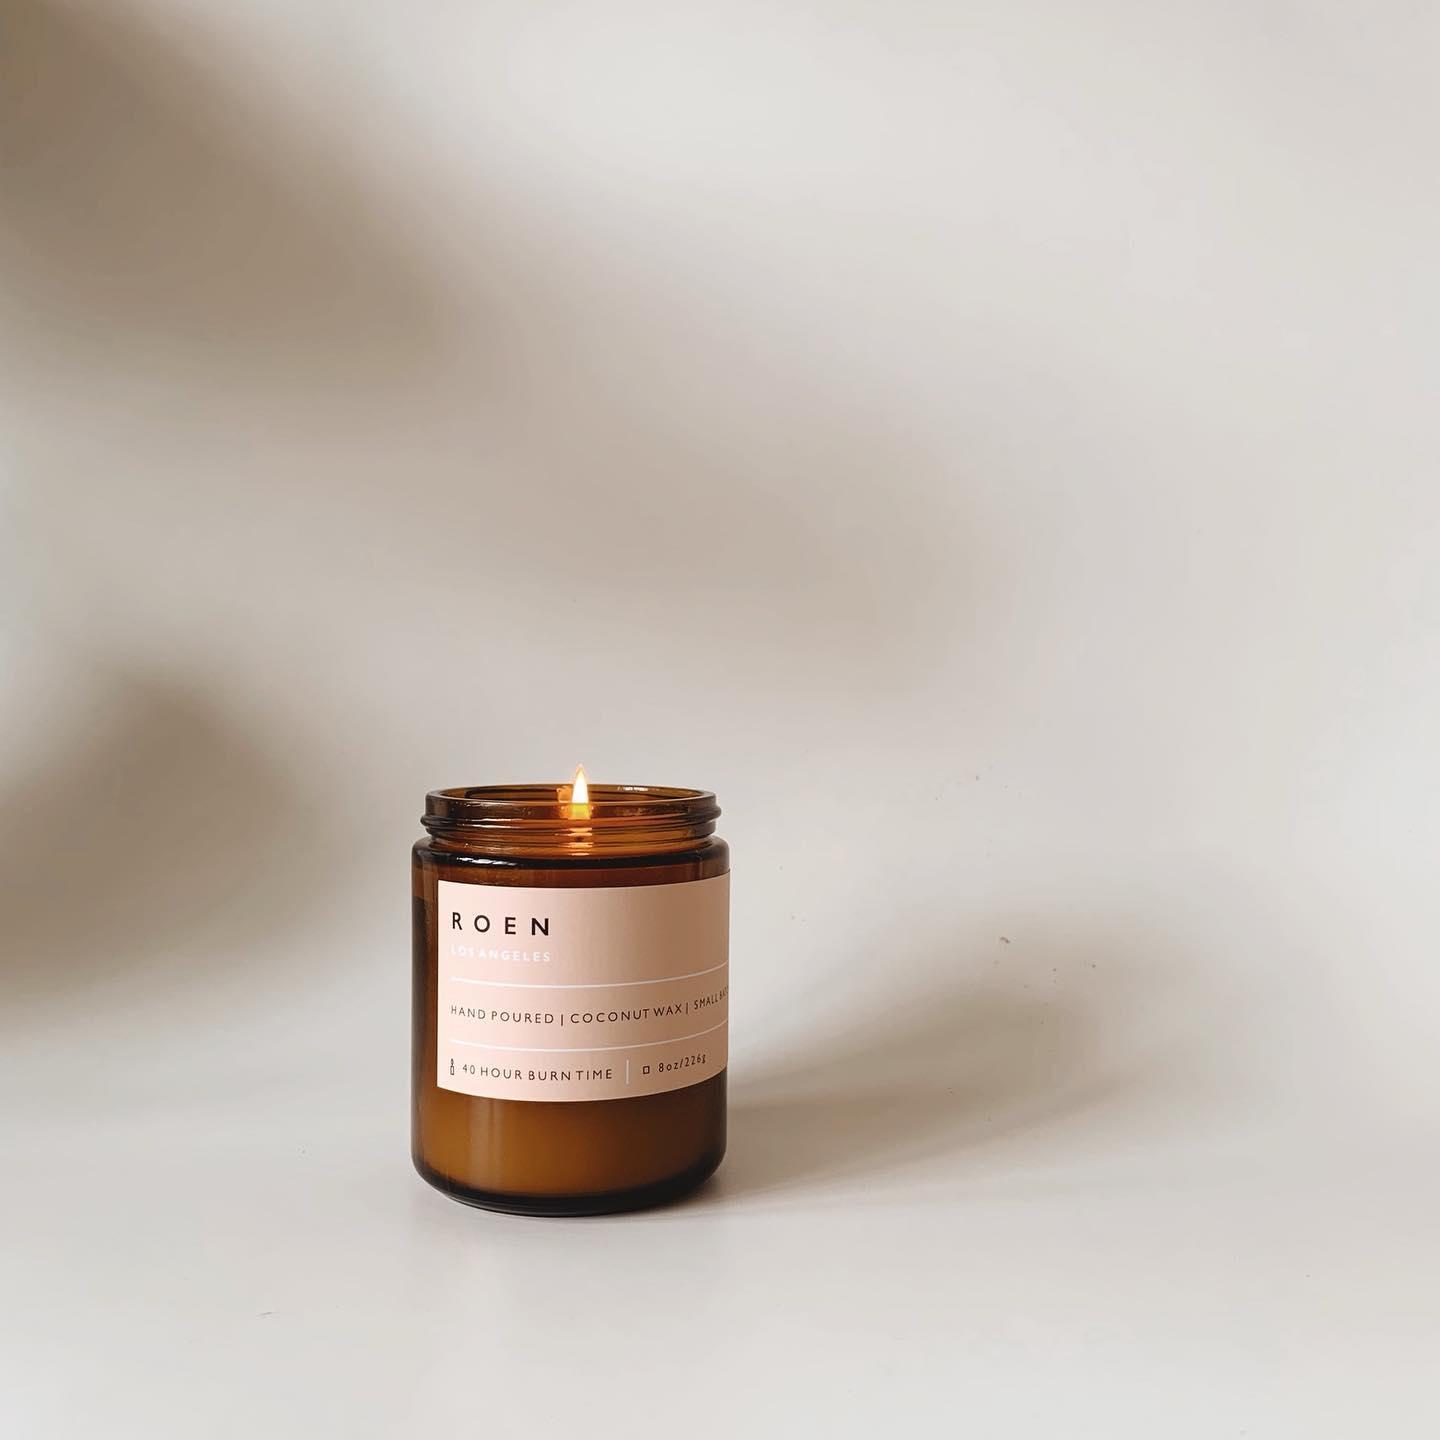 R O E N Nocturne Scented Candle - Osmology Scented Candles & Home Fragrance